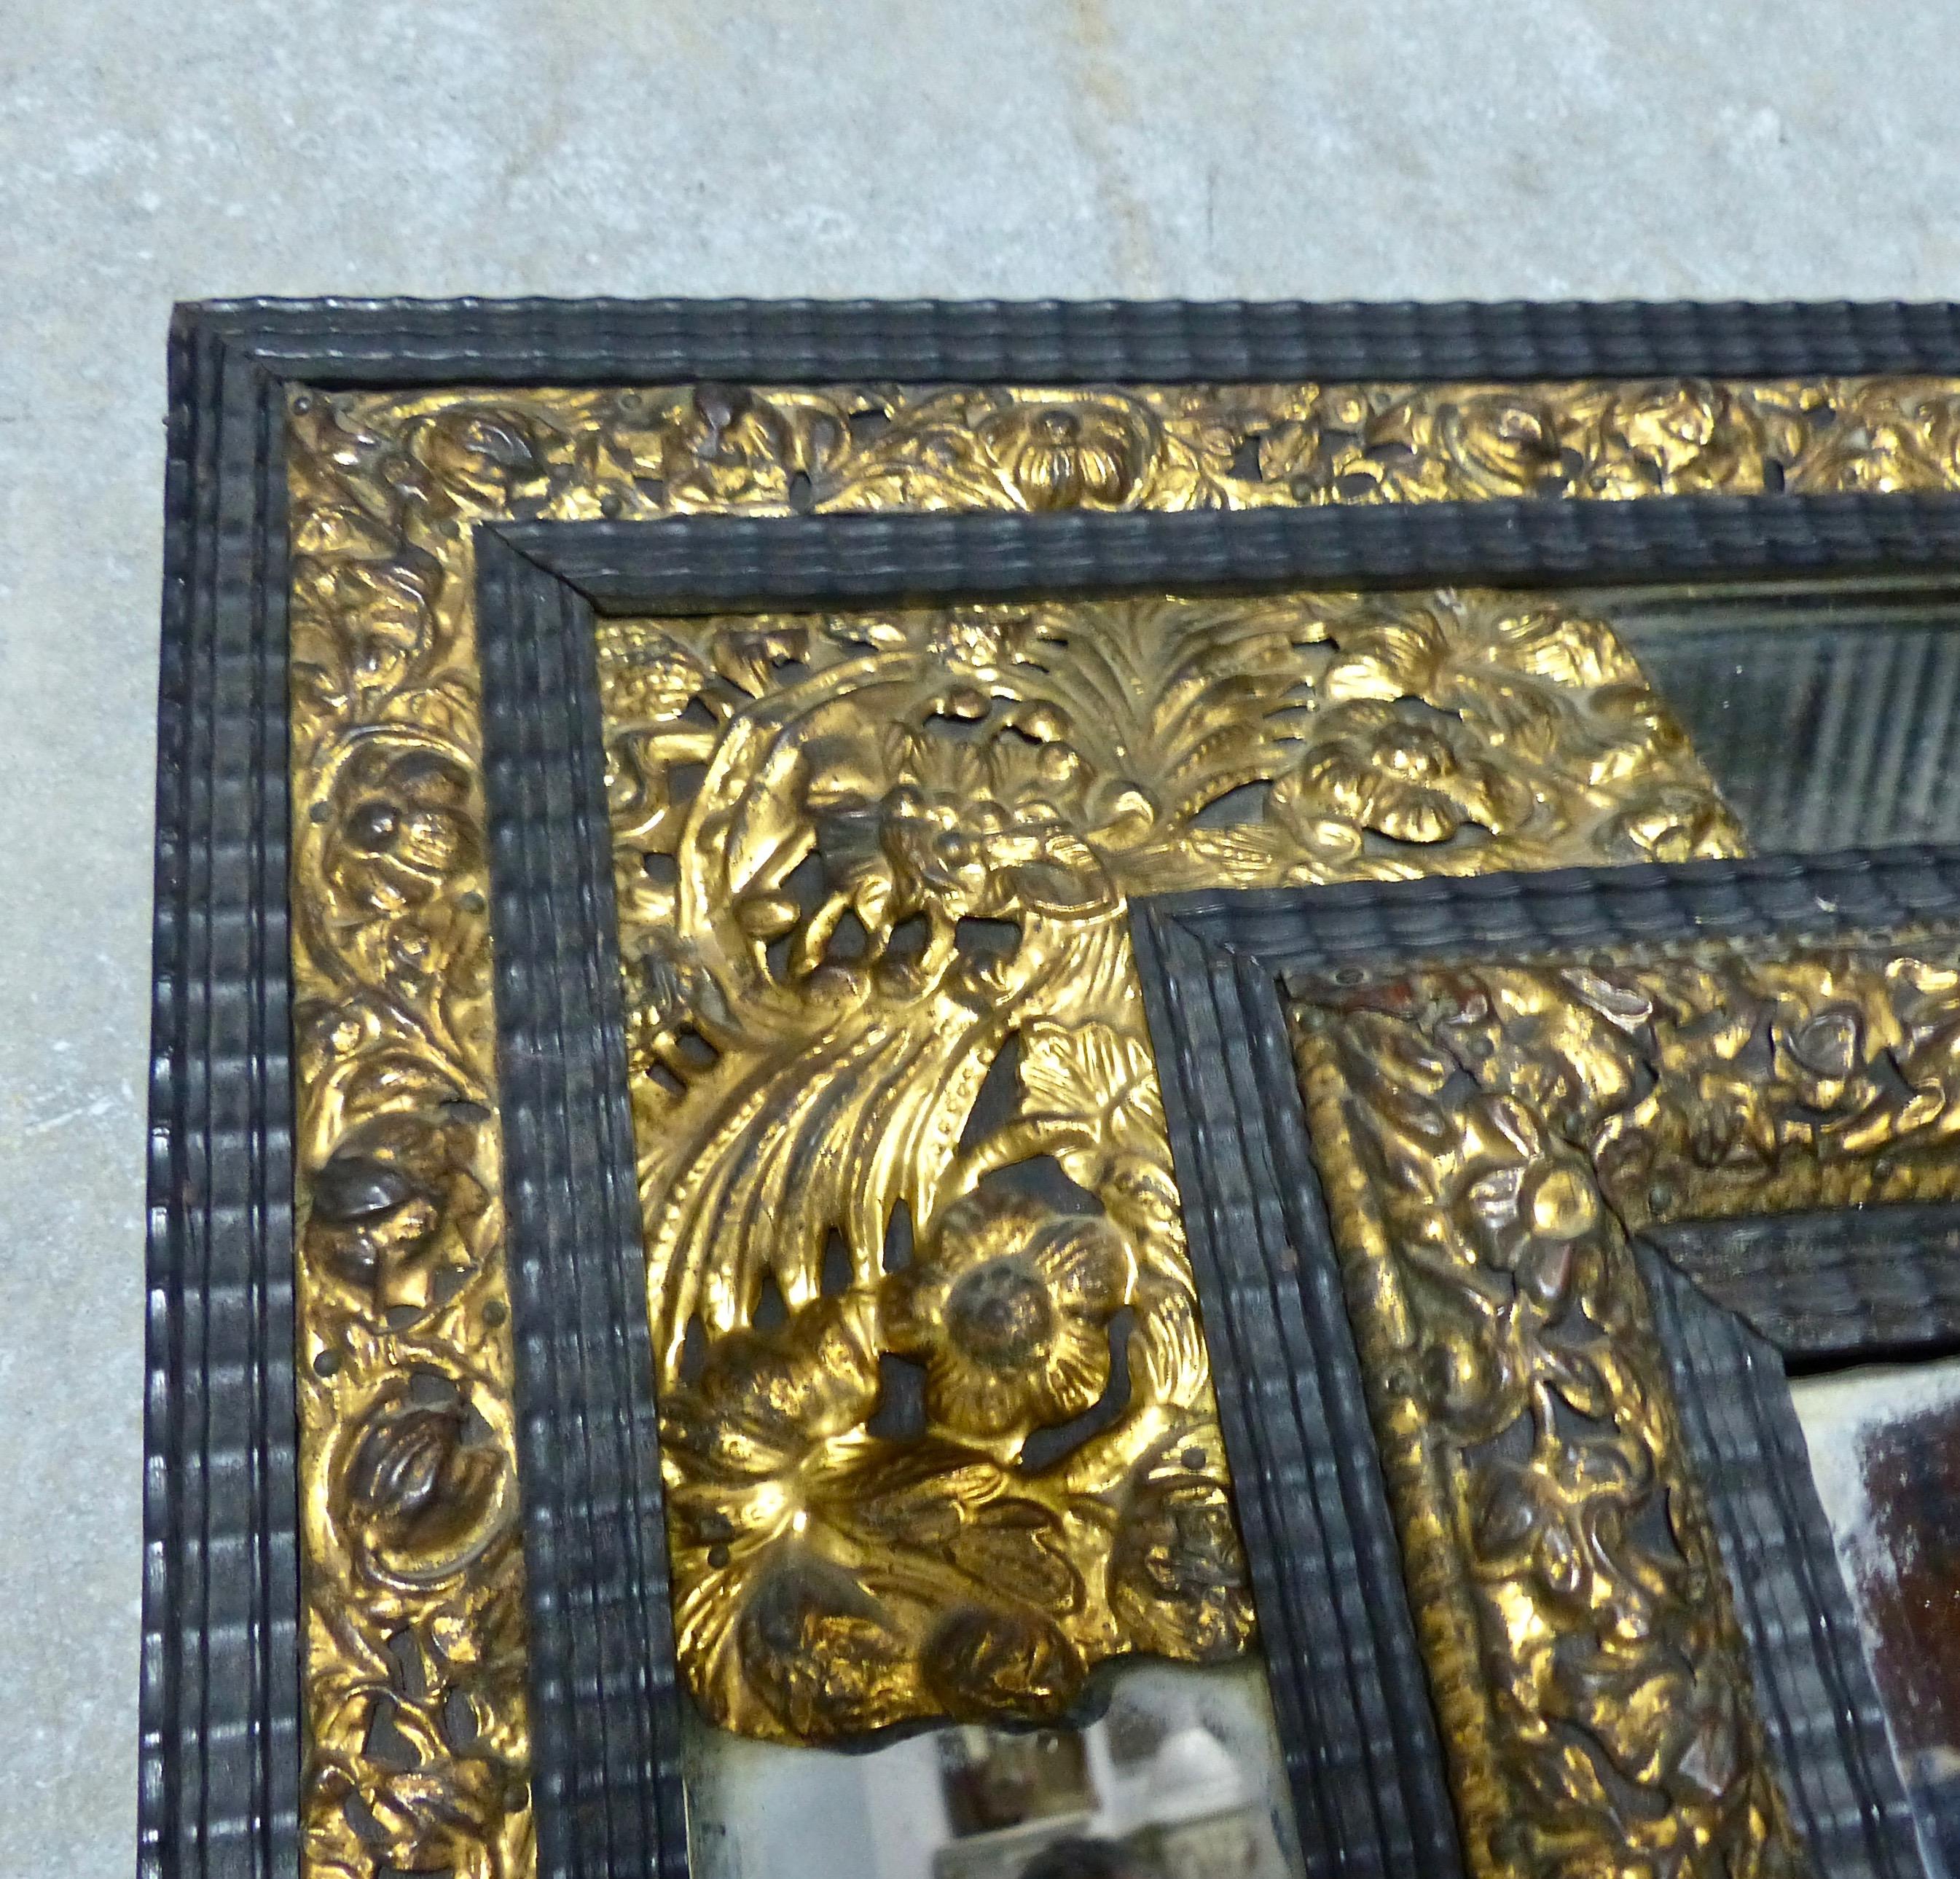 A circa 1870 ebony framed French mirror accented with gold leafed brass. Delicate floral details in the repousse (hand-hammered from the reverse) gilt brass. Timeless and unique.
Dimensions: 39 H” x 29 W”.